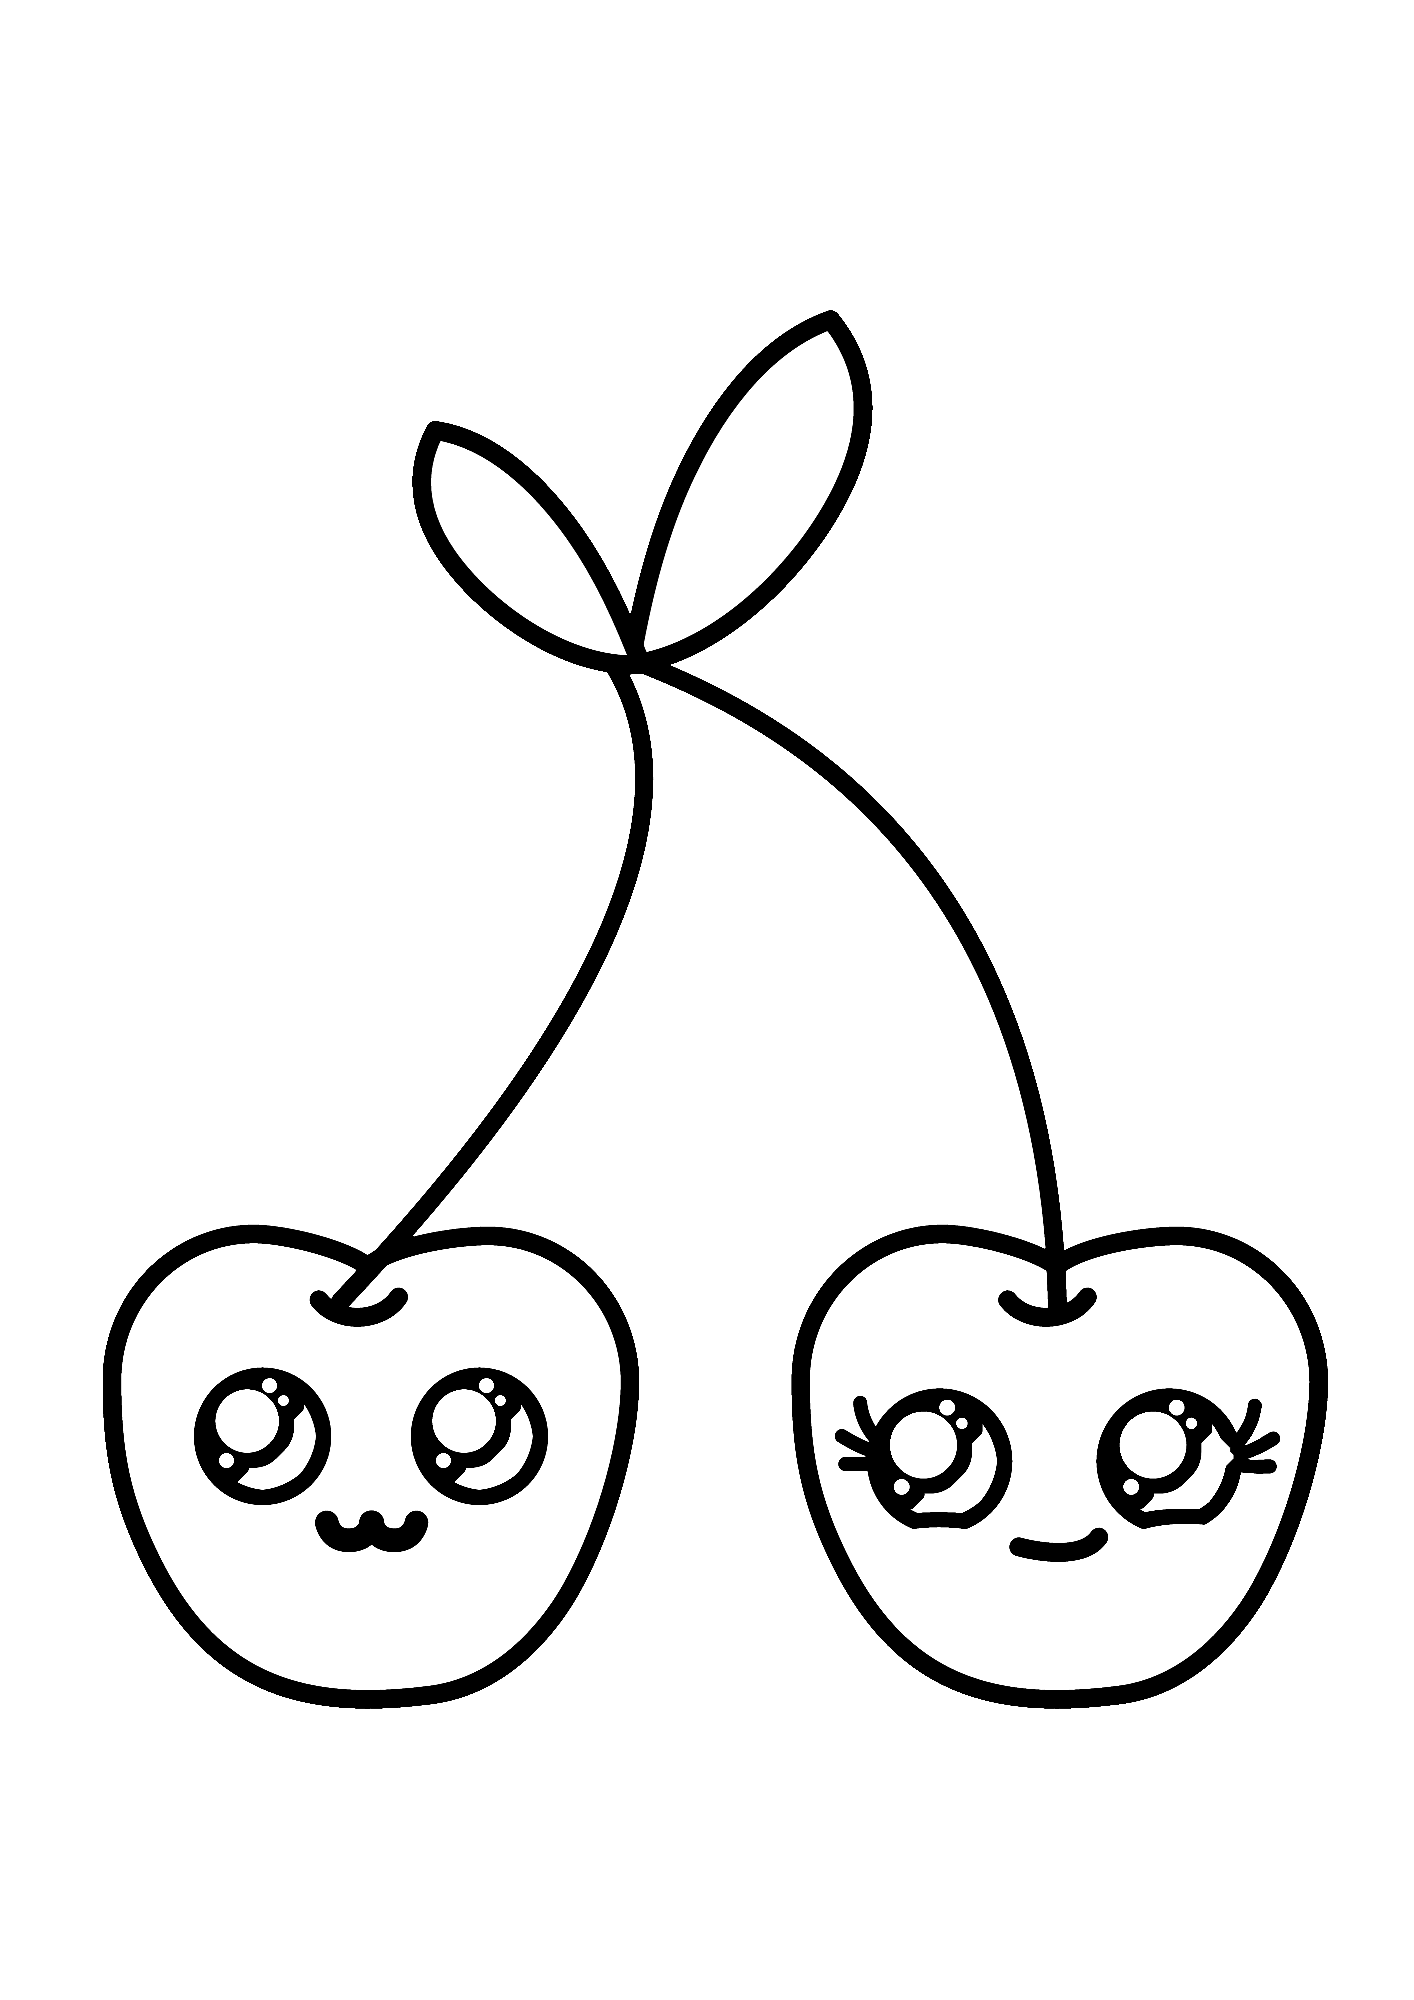 Cherries For Children Coloring Pages